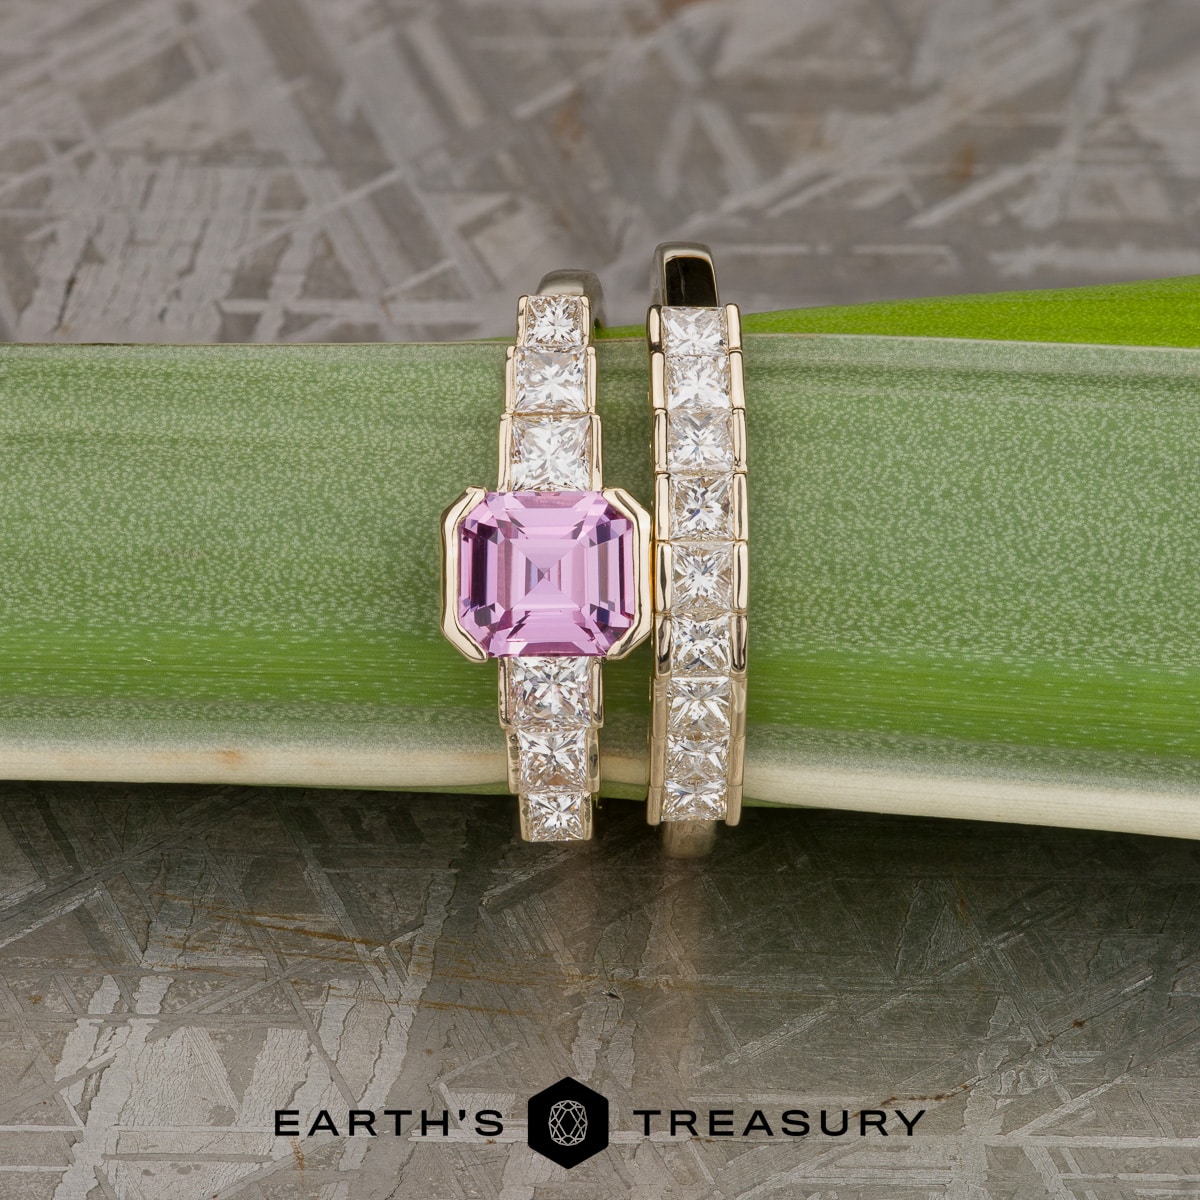 The "Andromeda" Ring in 14k yellow gold with 1.60-Carat pink sapphire, alongside the "Renee" ring in 14k yellow gold